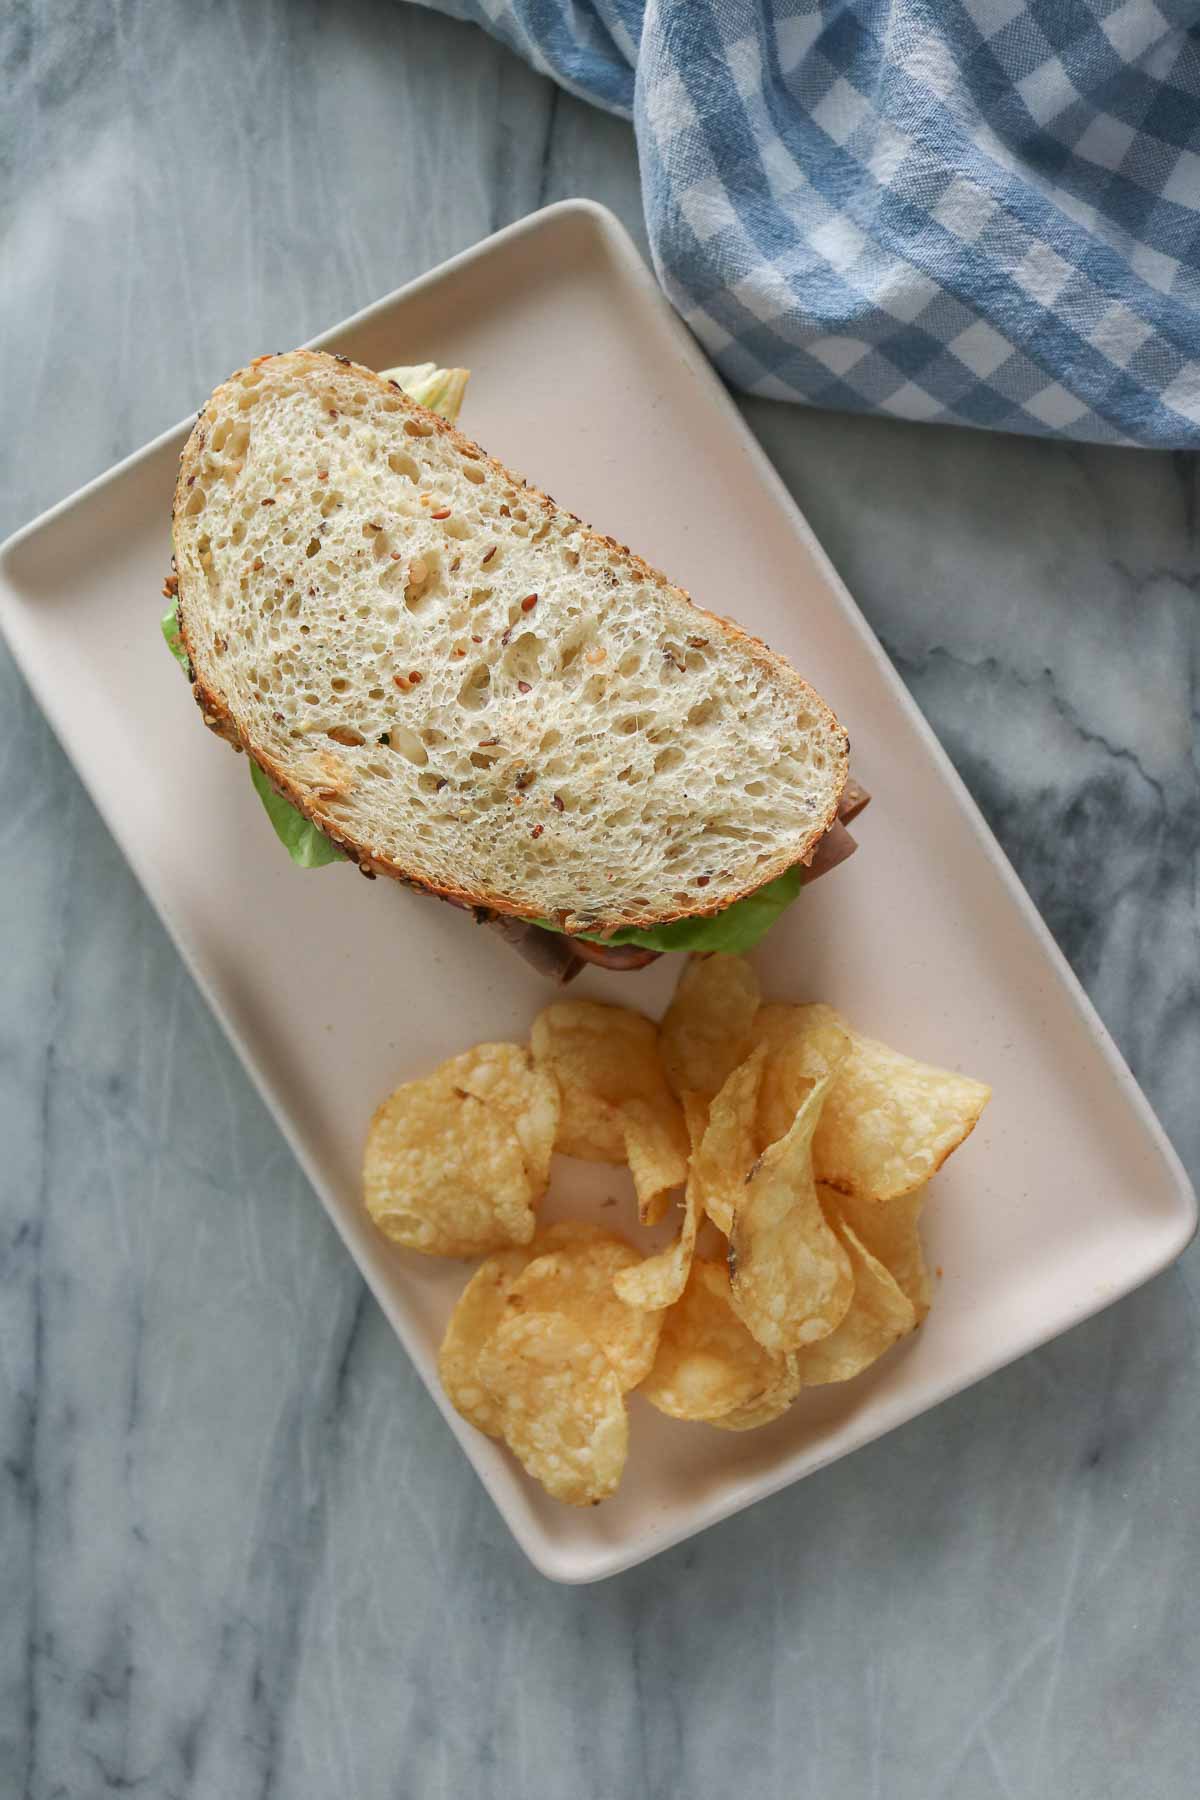 Overhead shot of a sandwich and potato chips on a plate.